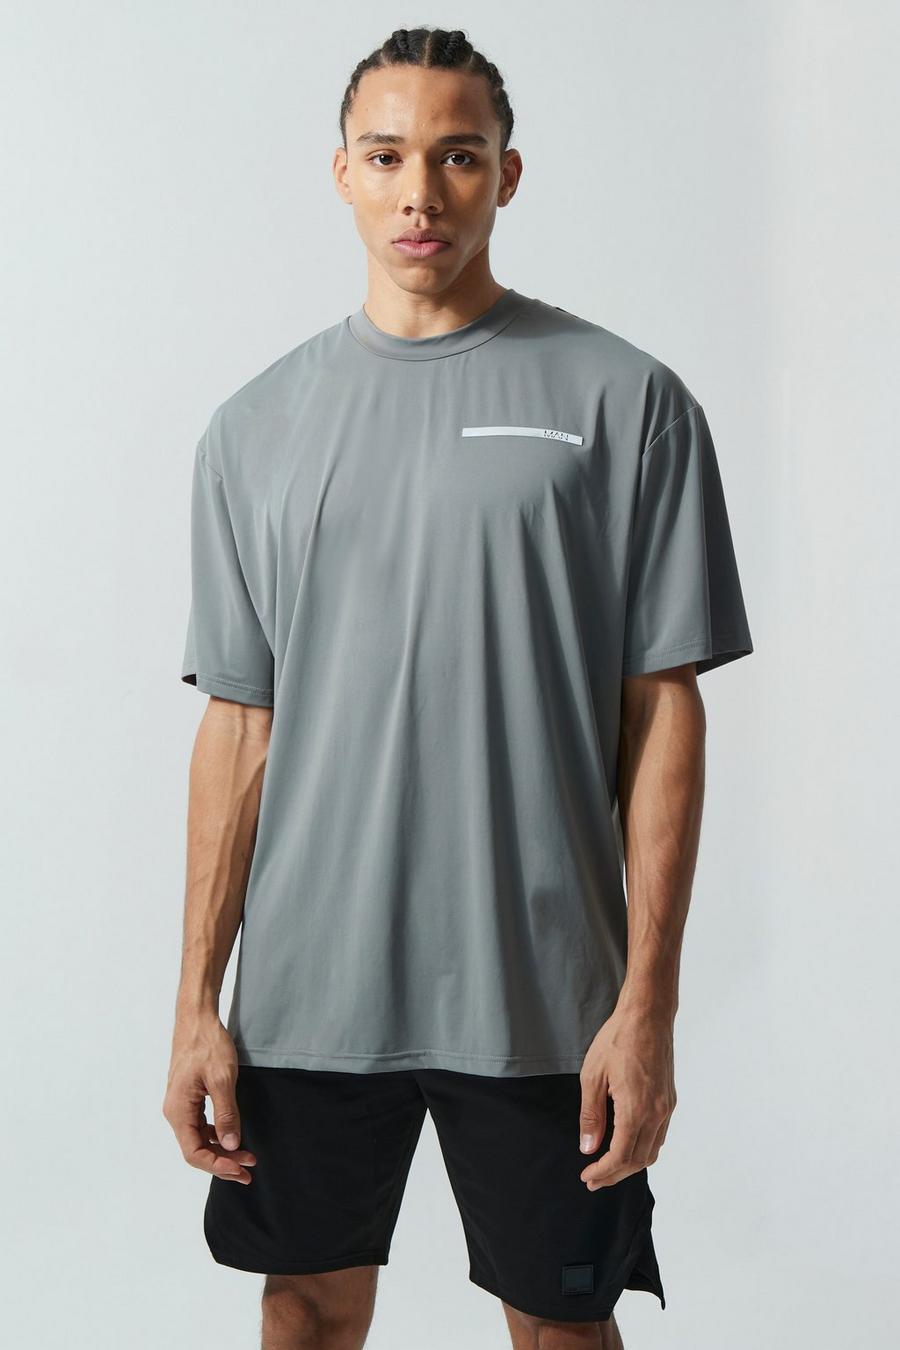 Charcoal gris Tall Man Active Performance Oversized T Shirt